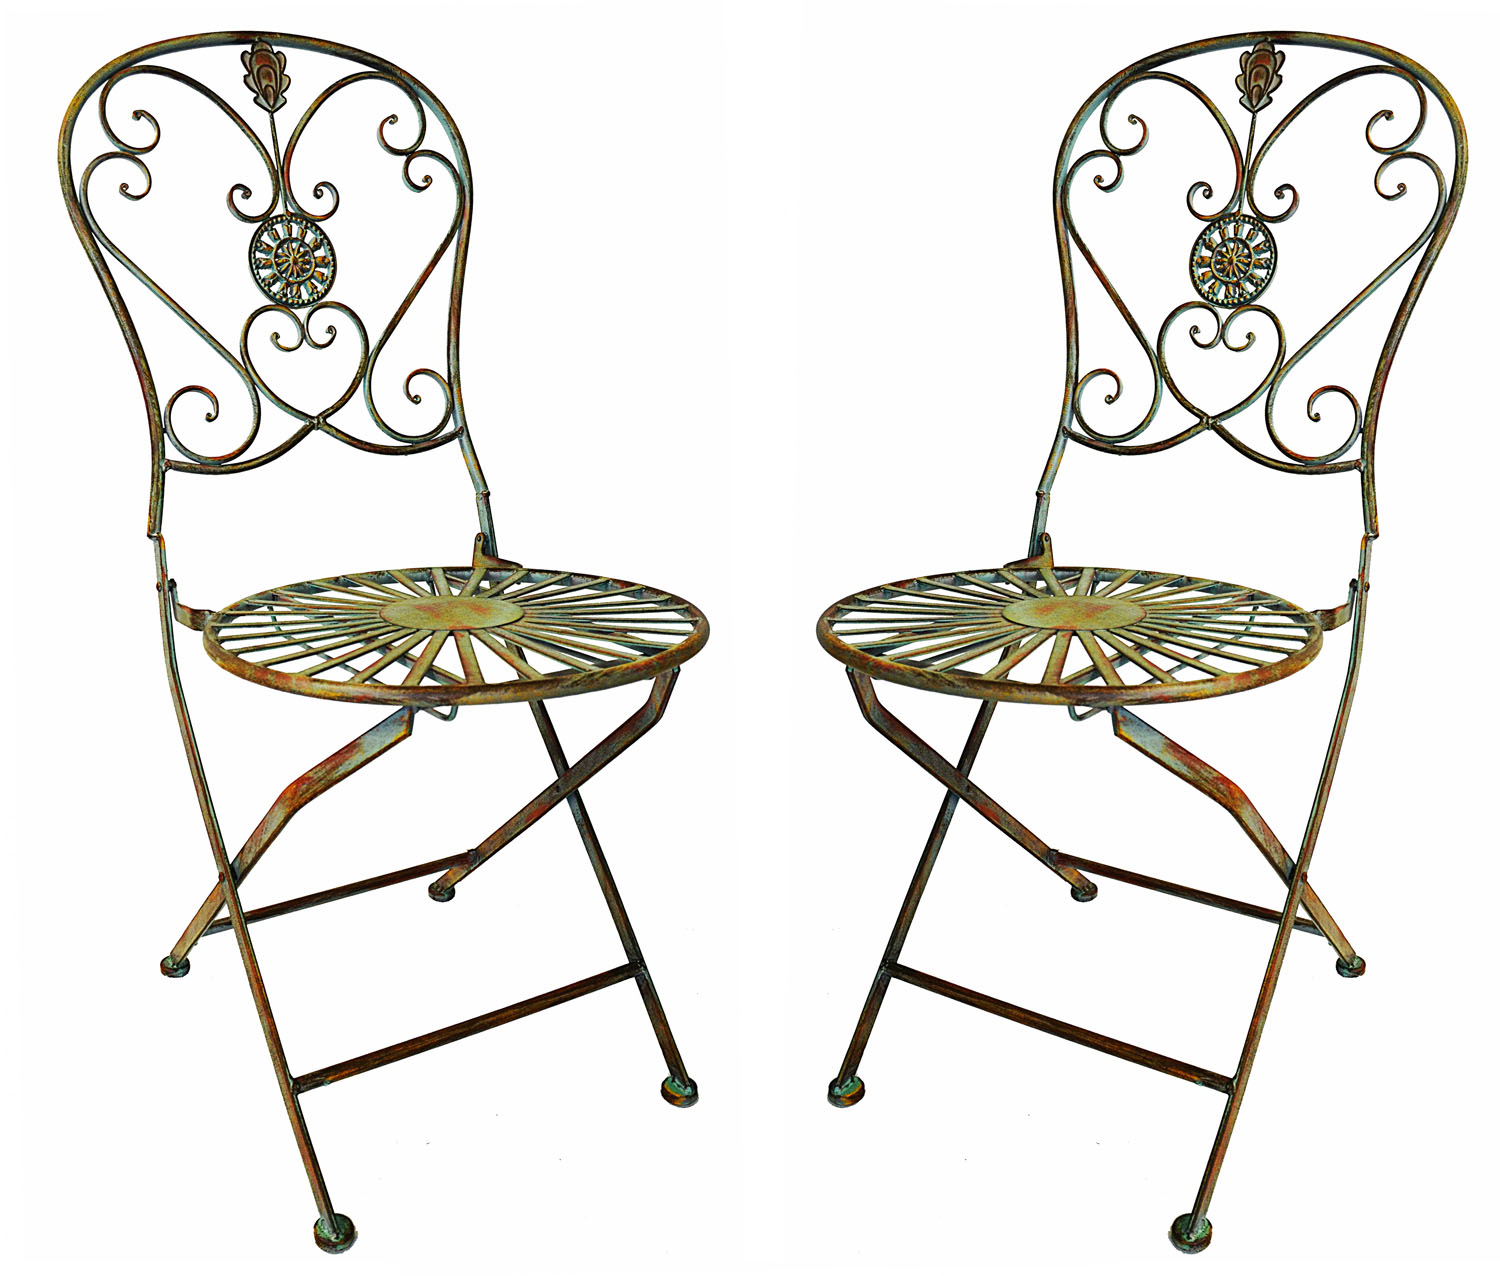 Westcharm Outdoor Folding Metal Patio Bistro Chair 2-Piece Set with Scrolling Heart & Peacock Tail Motif, Verdigris Green - image 1 of 8